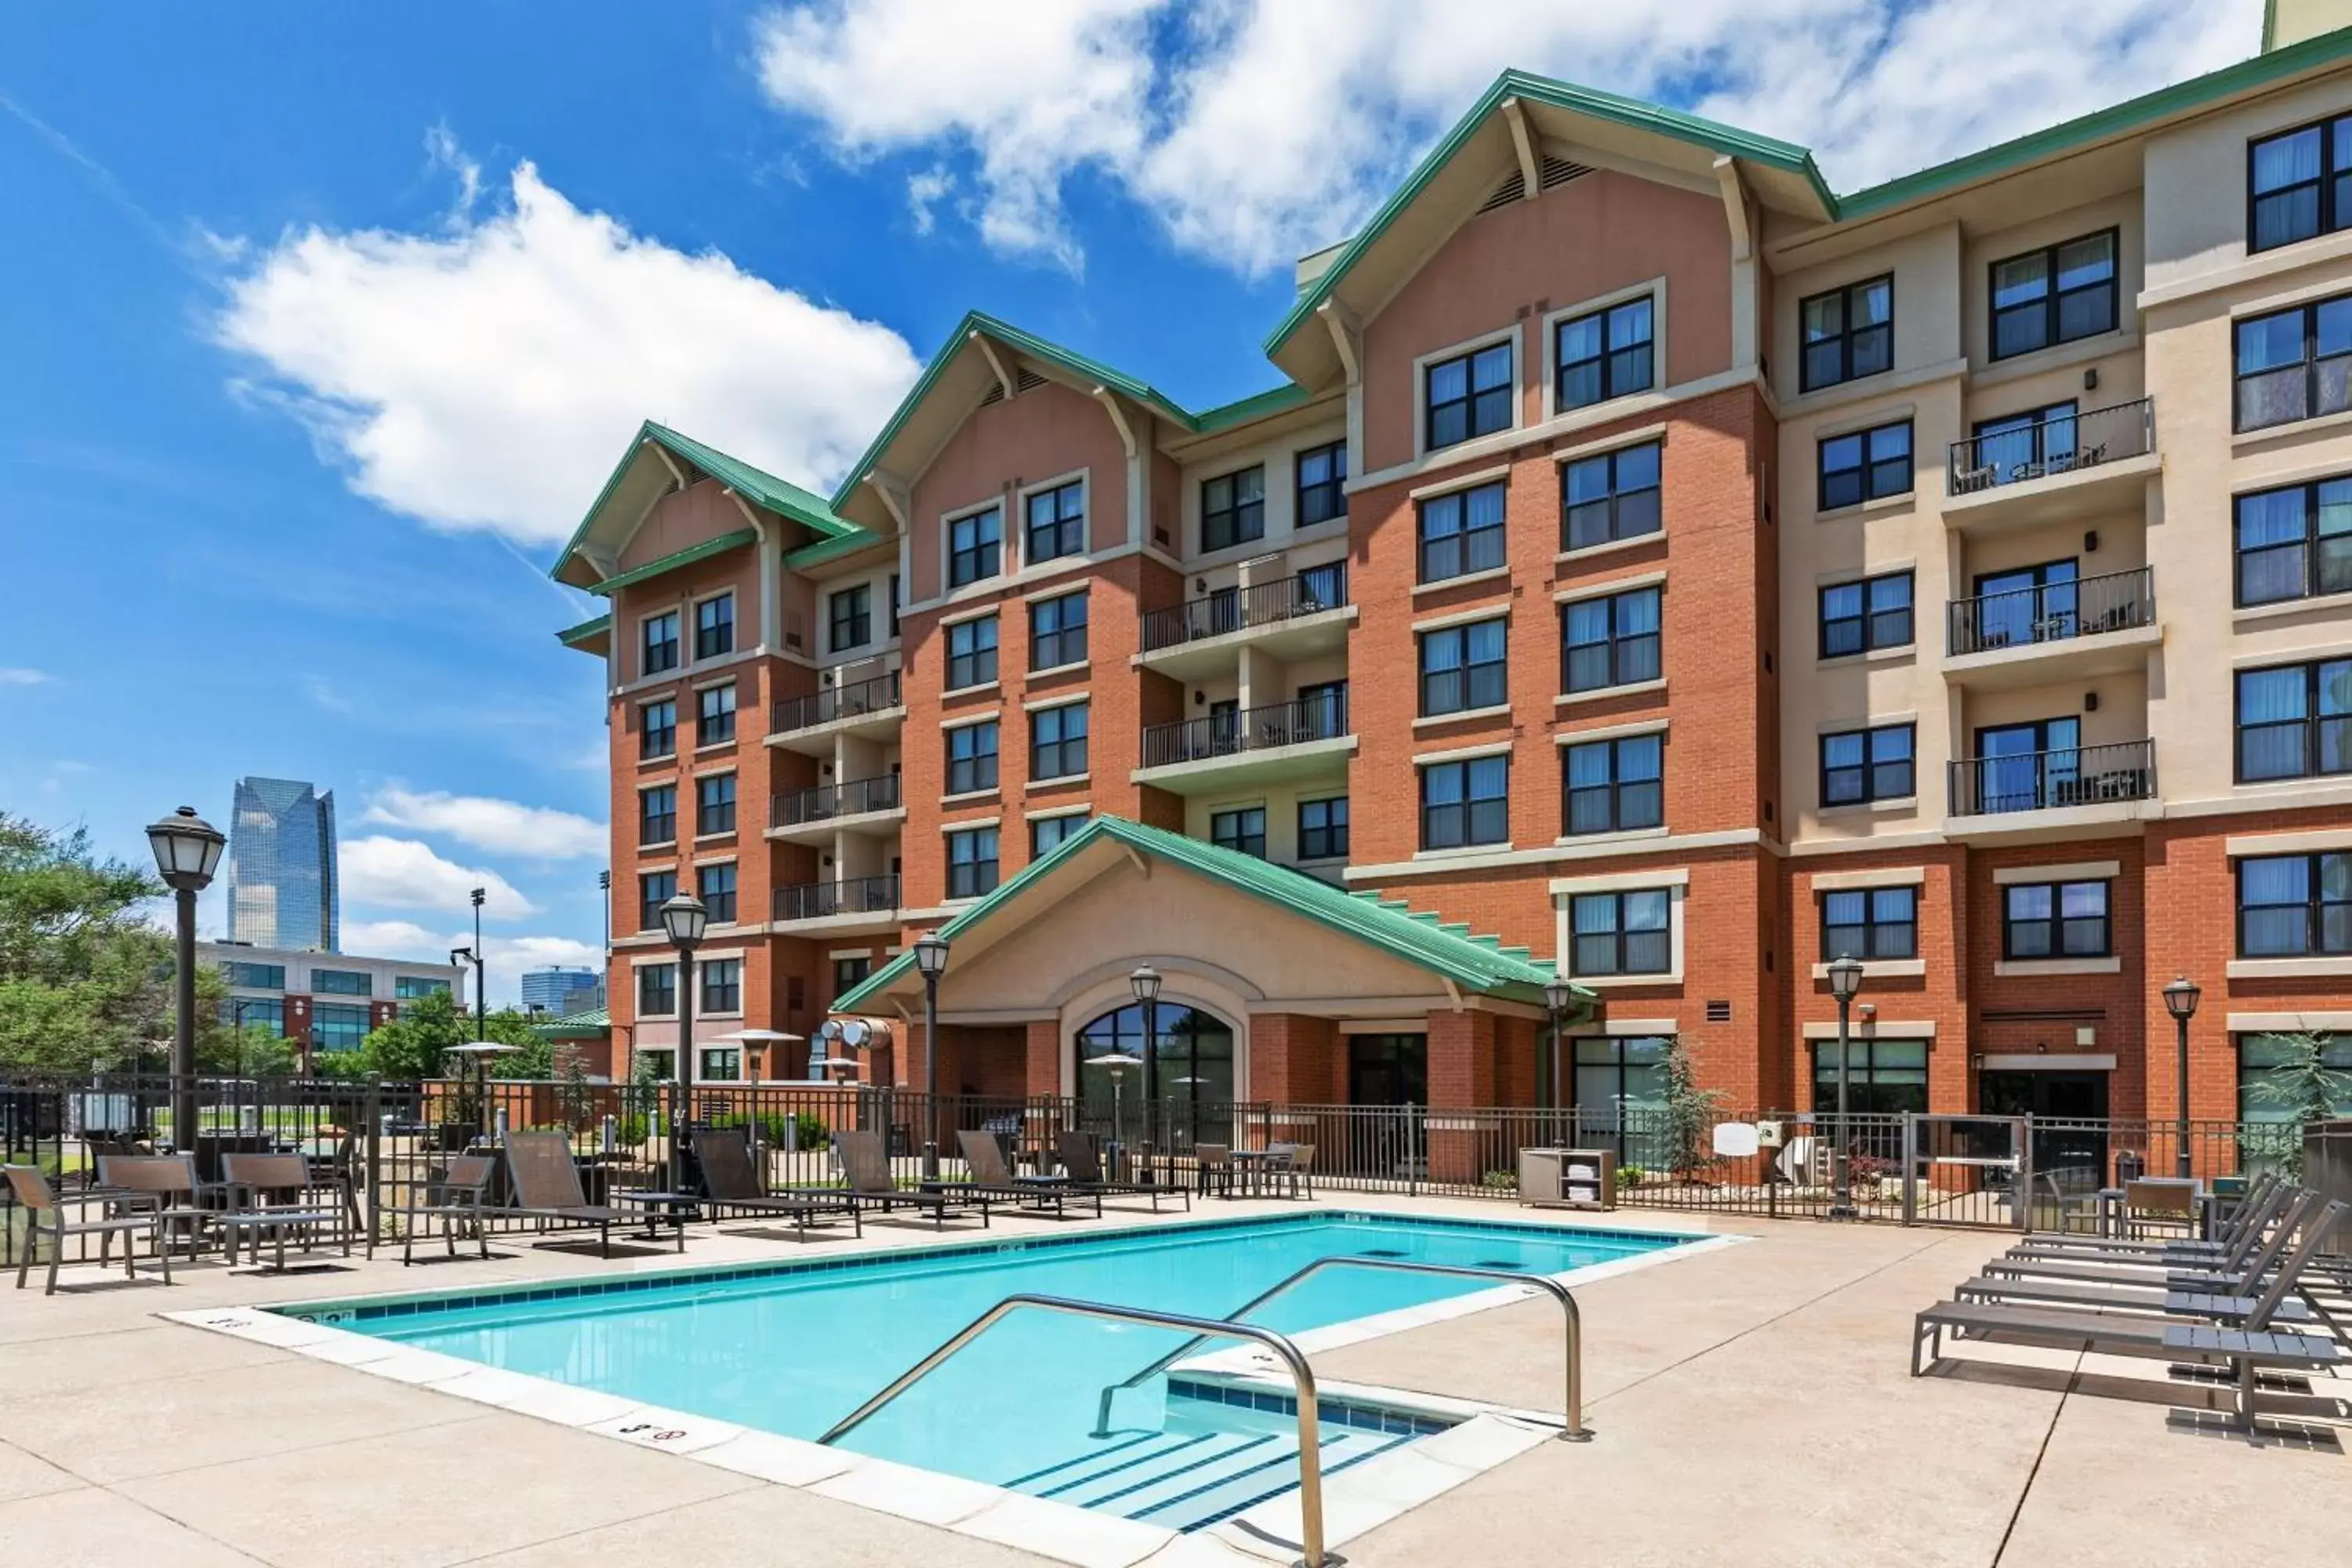 Swimming pool, Property Building in Residence Inn by Marriott Oklahoma City Downtown/Bricktown